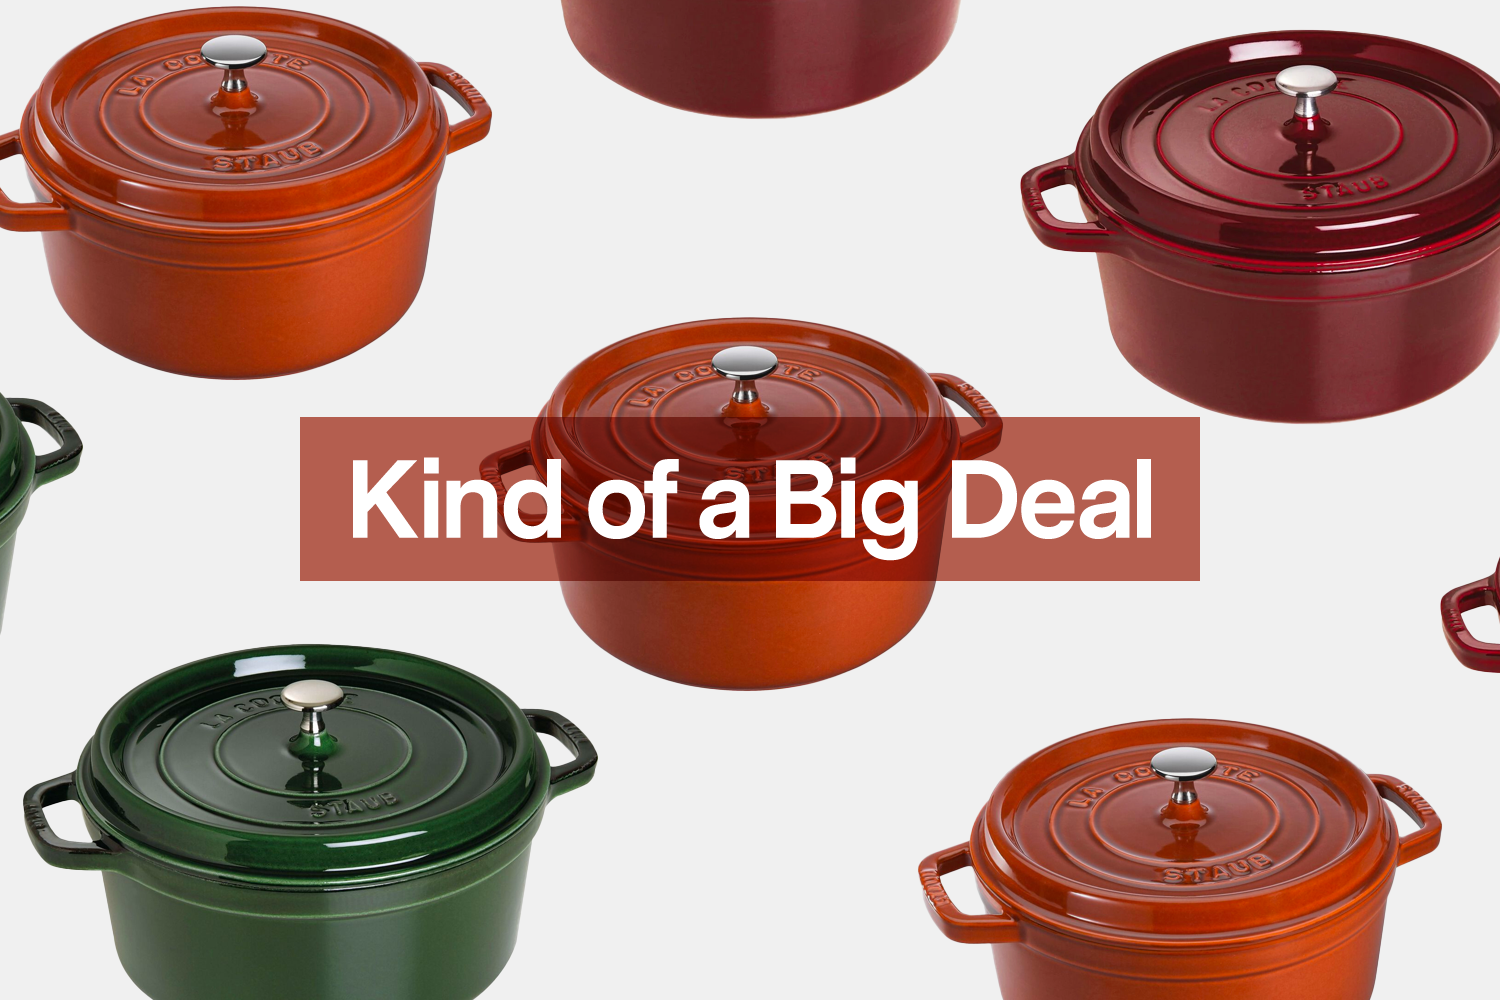 Get This Autumnal Staub Cast Iron Cocotte for 50% Off